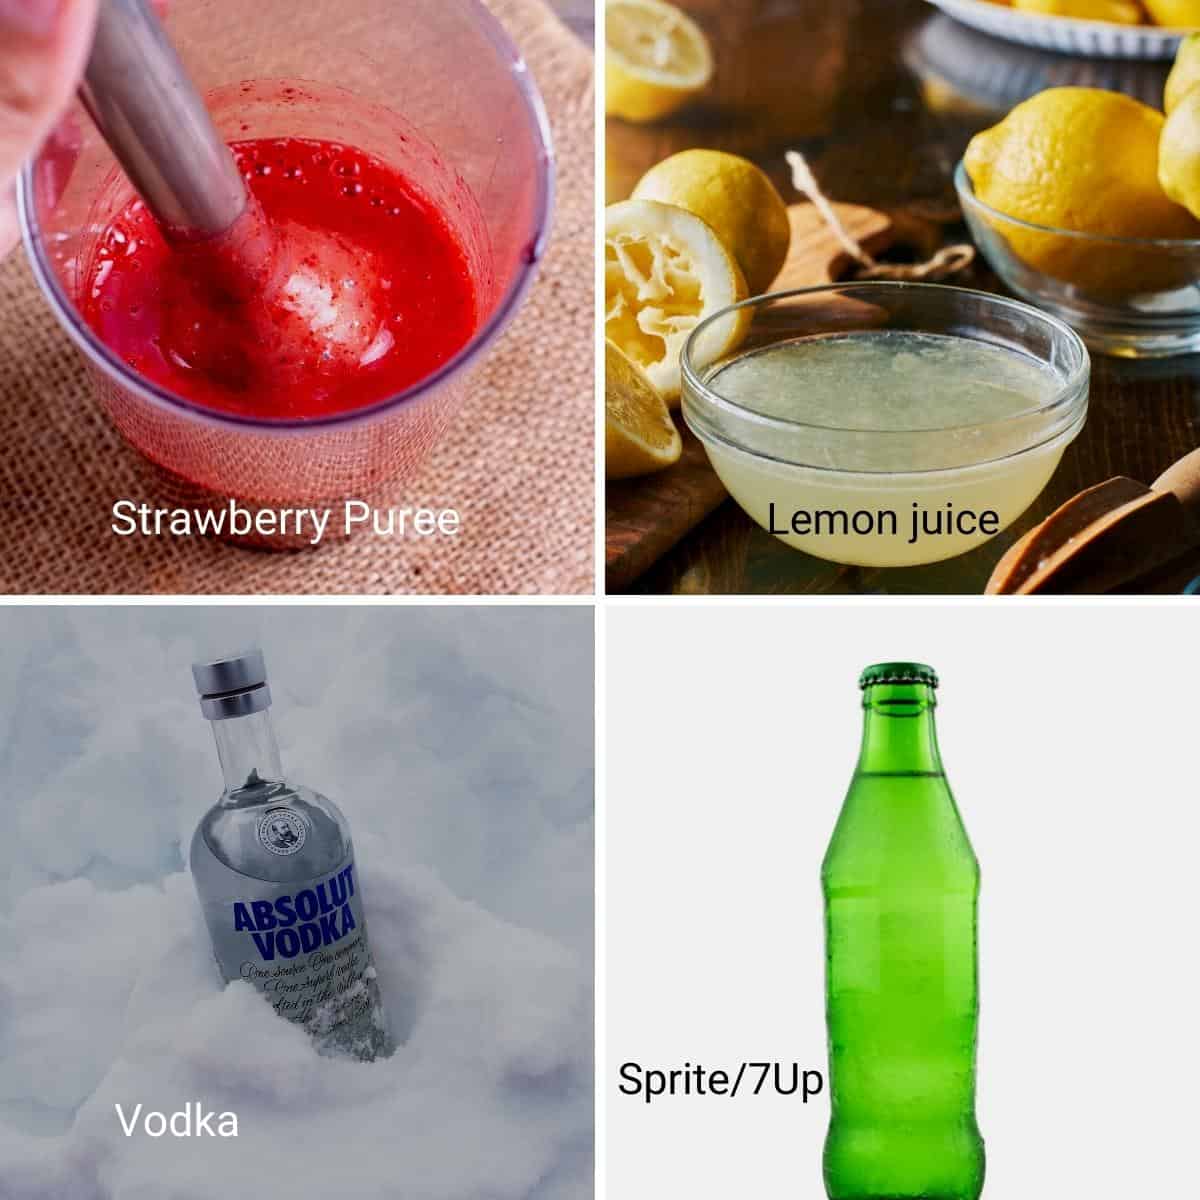 Ingredients for making strawberry vodka cocktail.